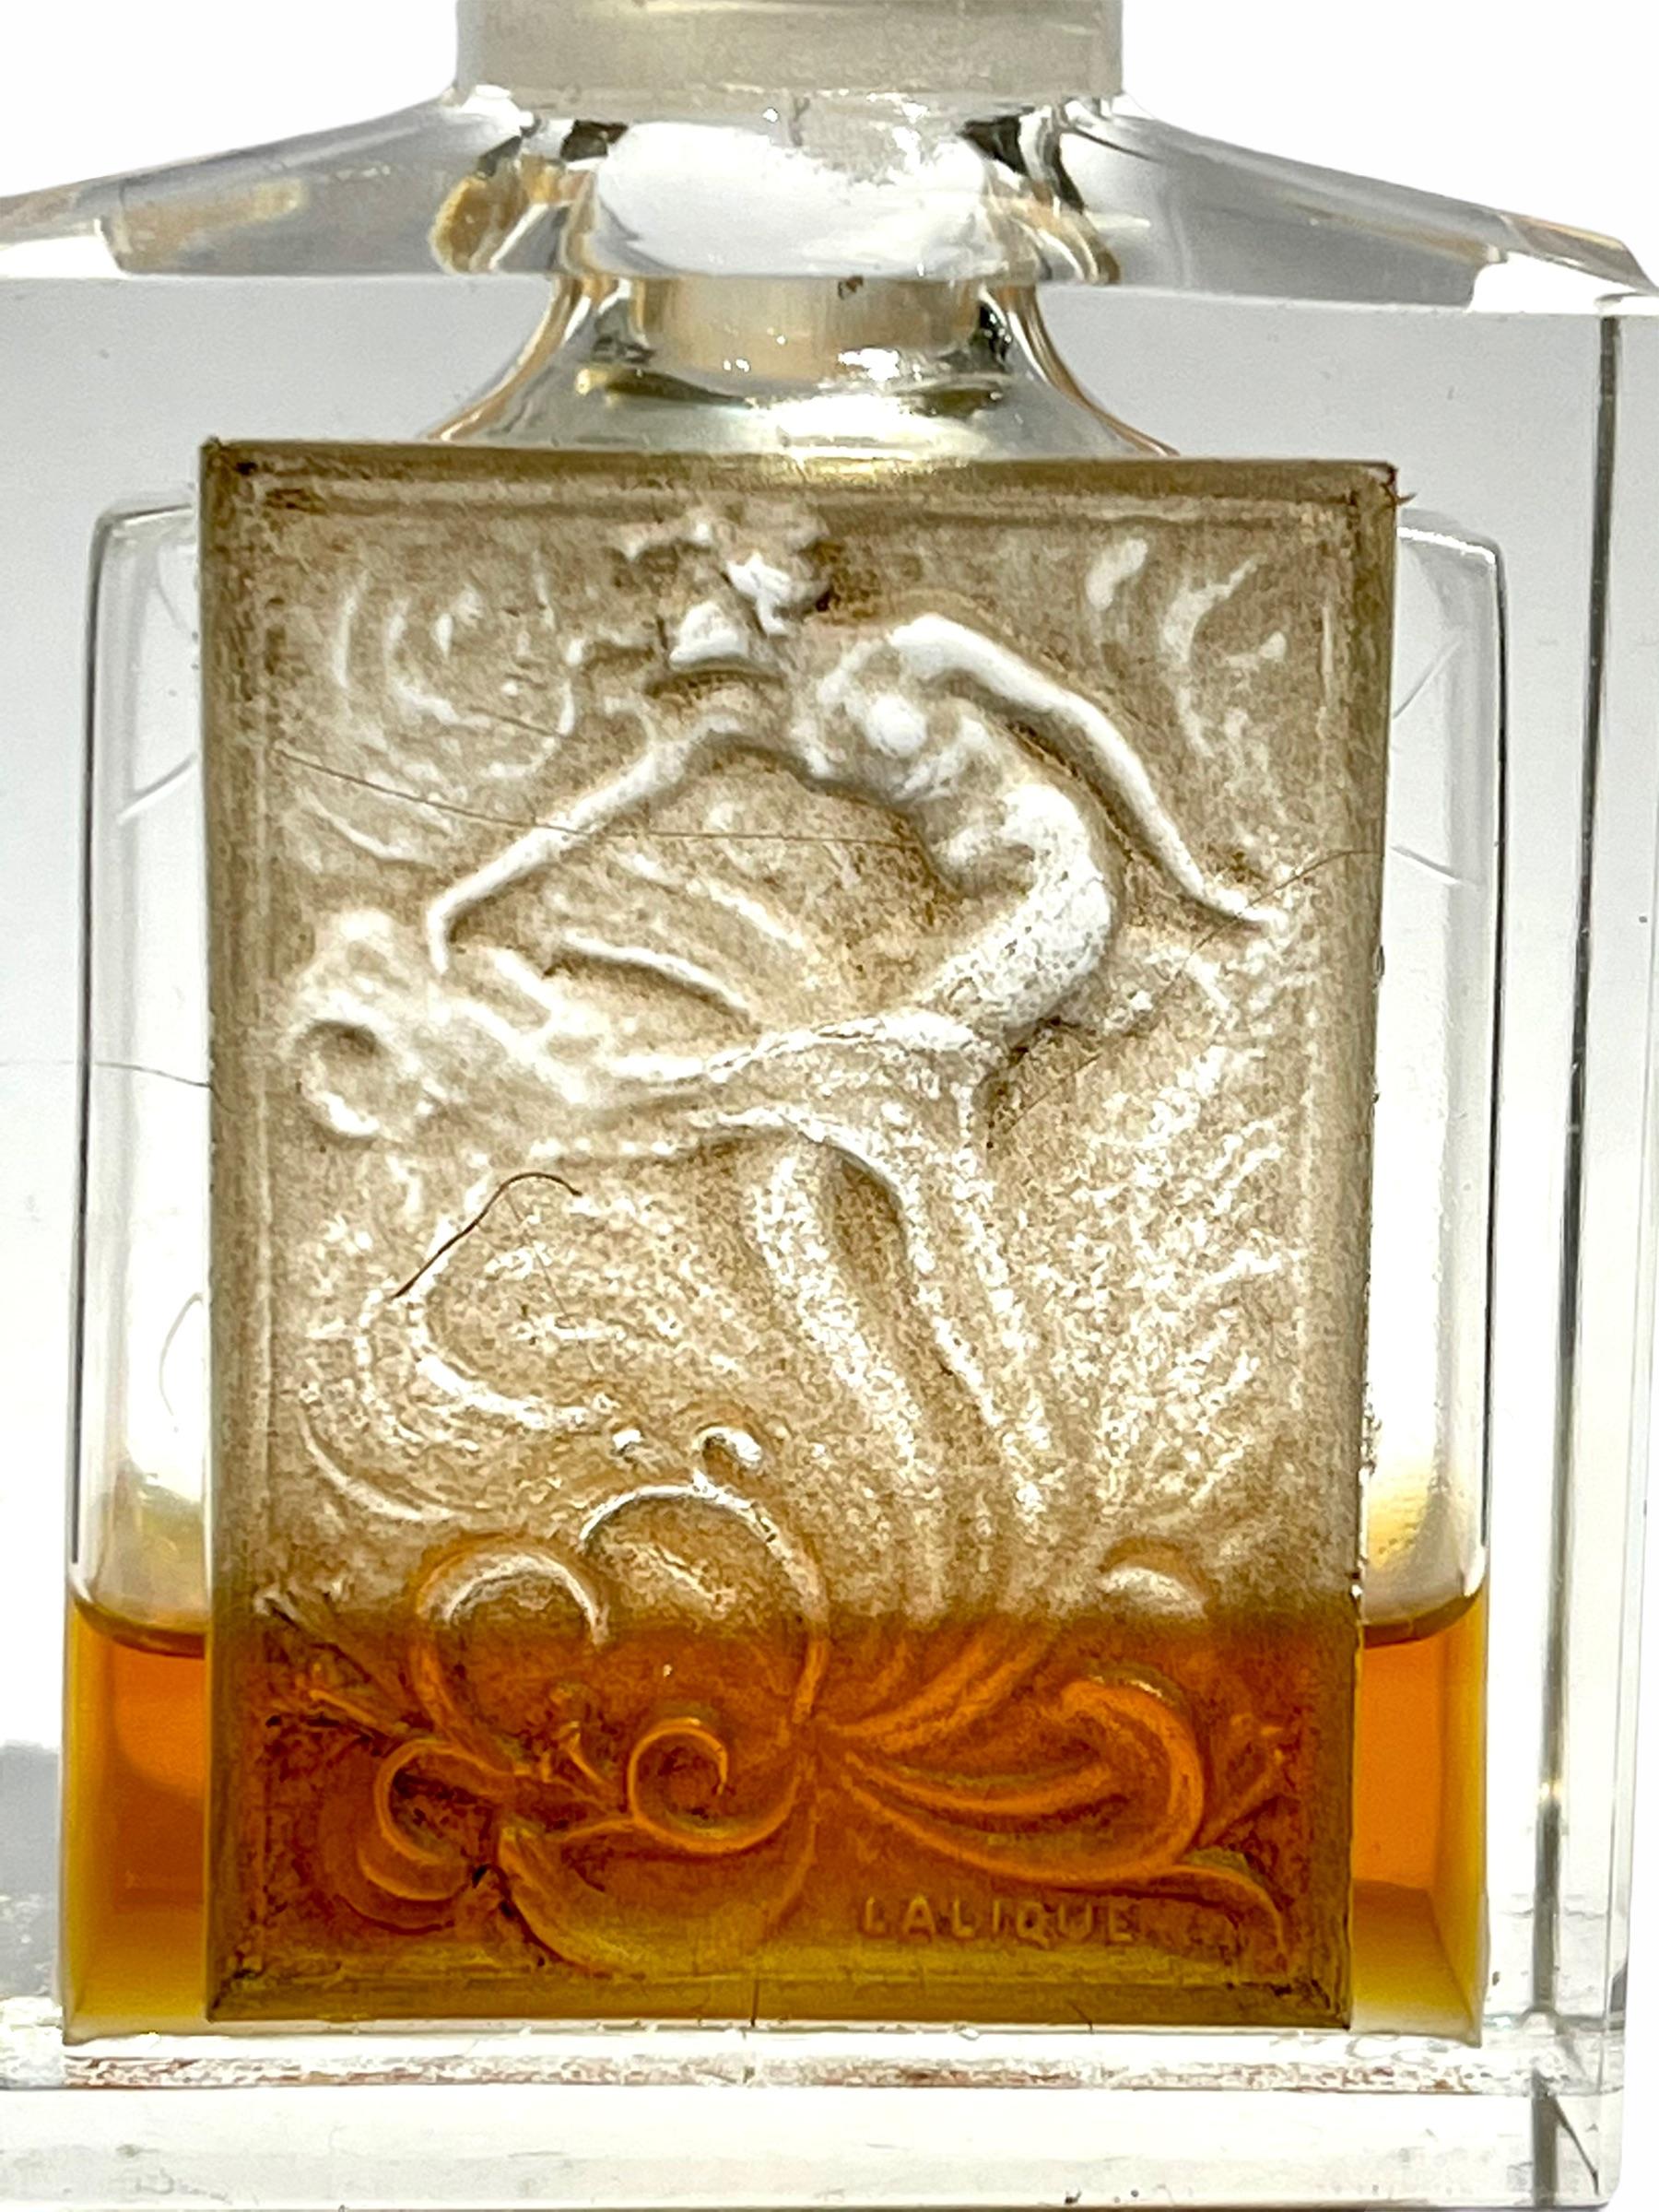 Early 20th Century 1911 Rene Lalique L'Effleurt for Coty Perfume Bottle Sepia Stained Glass, Cicada